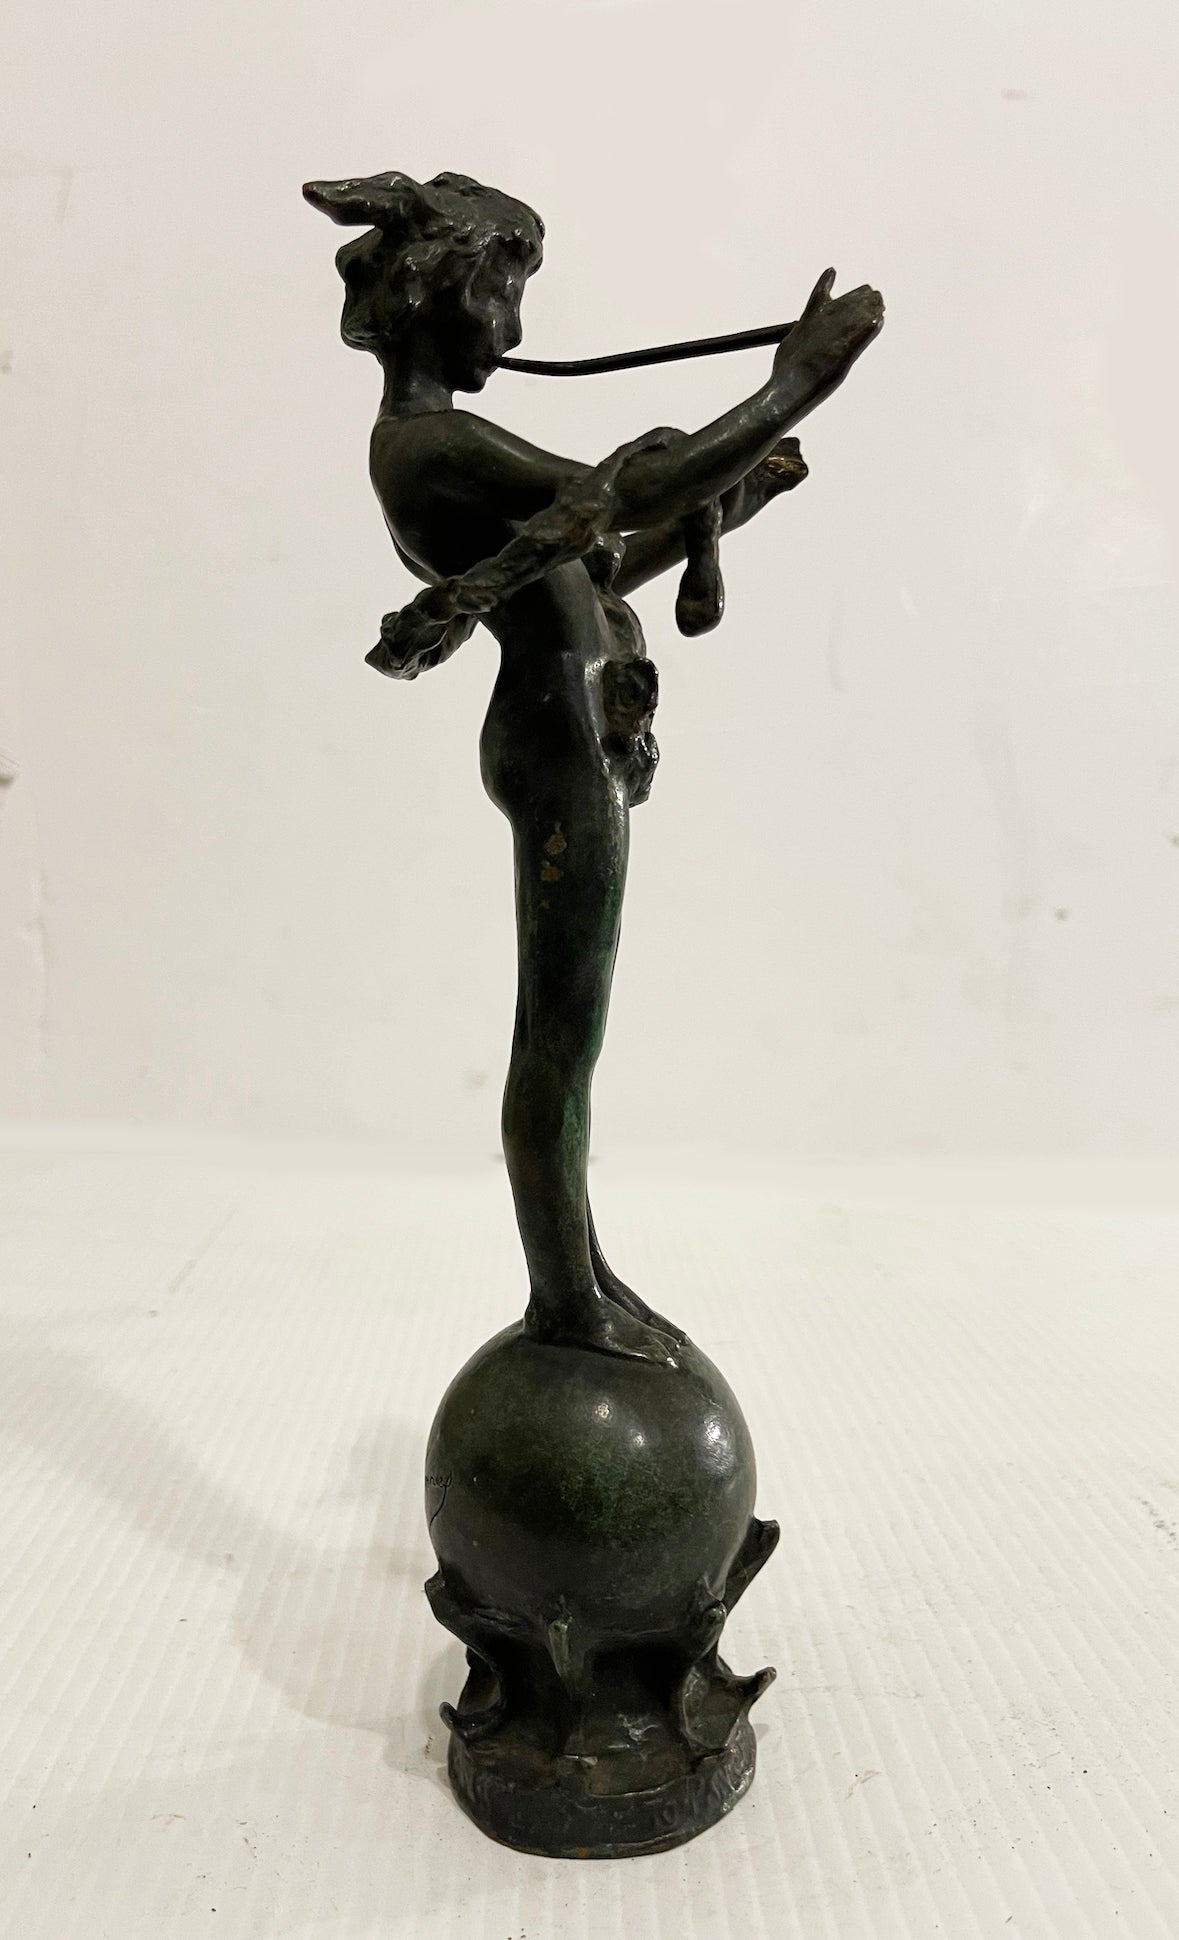 Frederick William MacMonnies Signed Bronze Sculpture: "Pan of Rohallion"